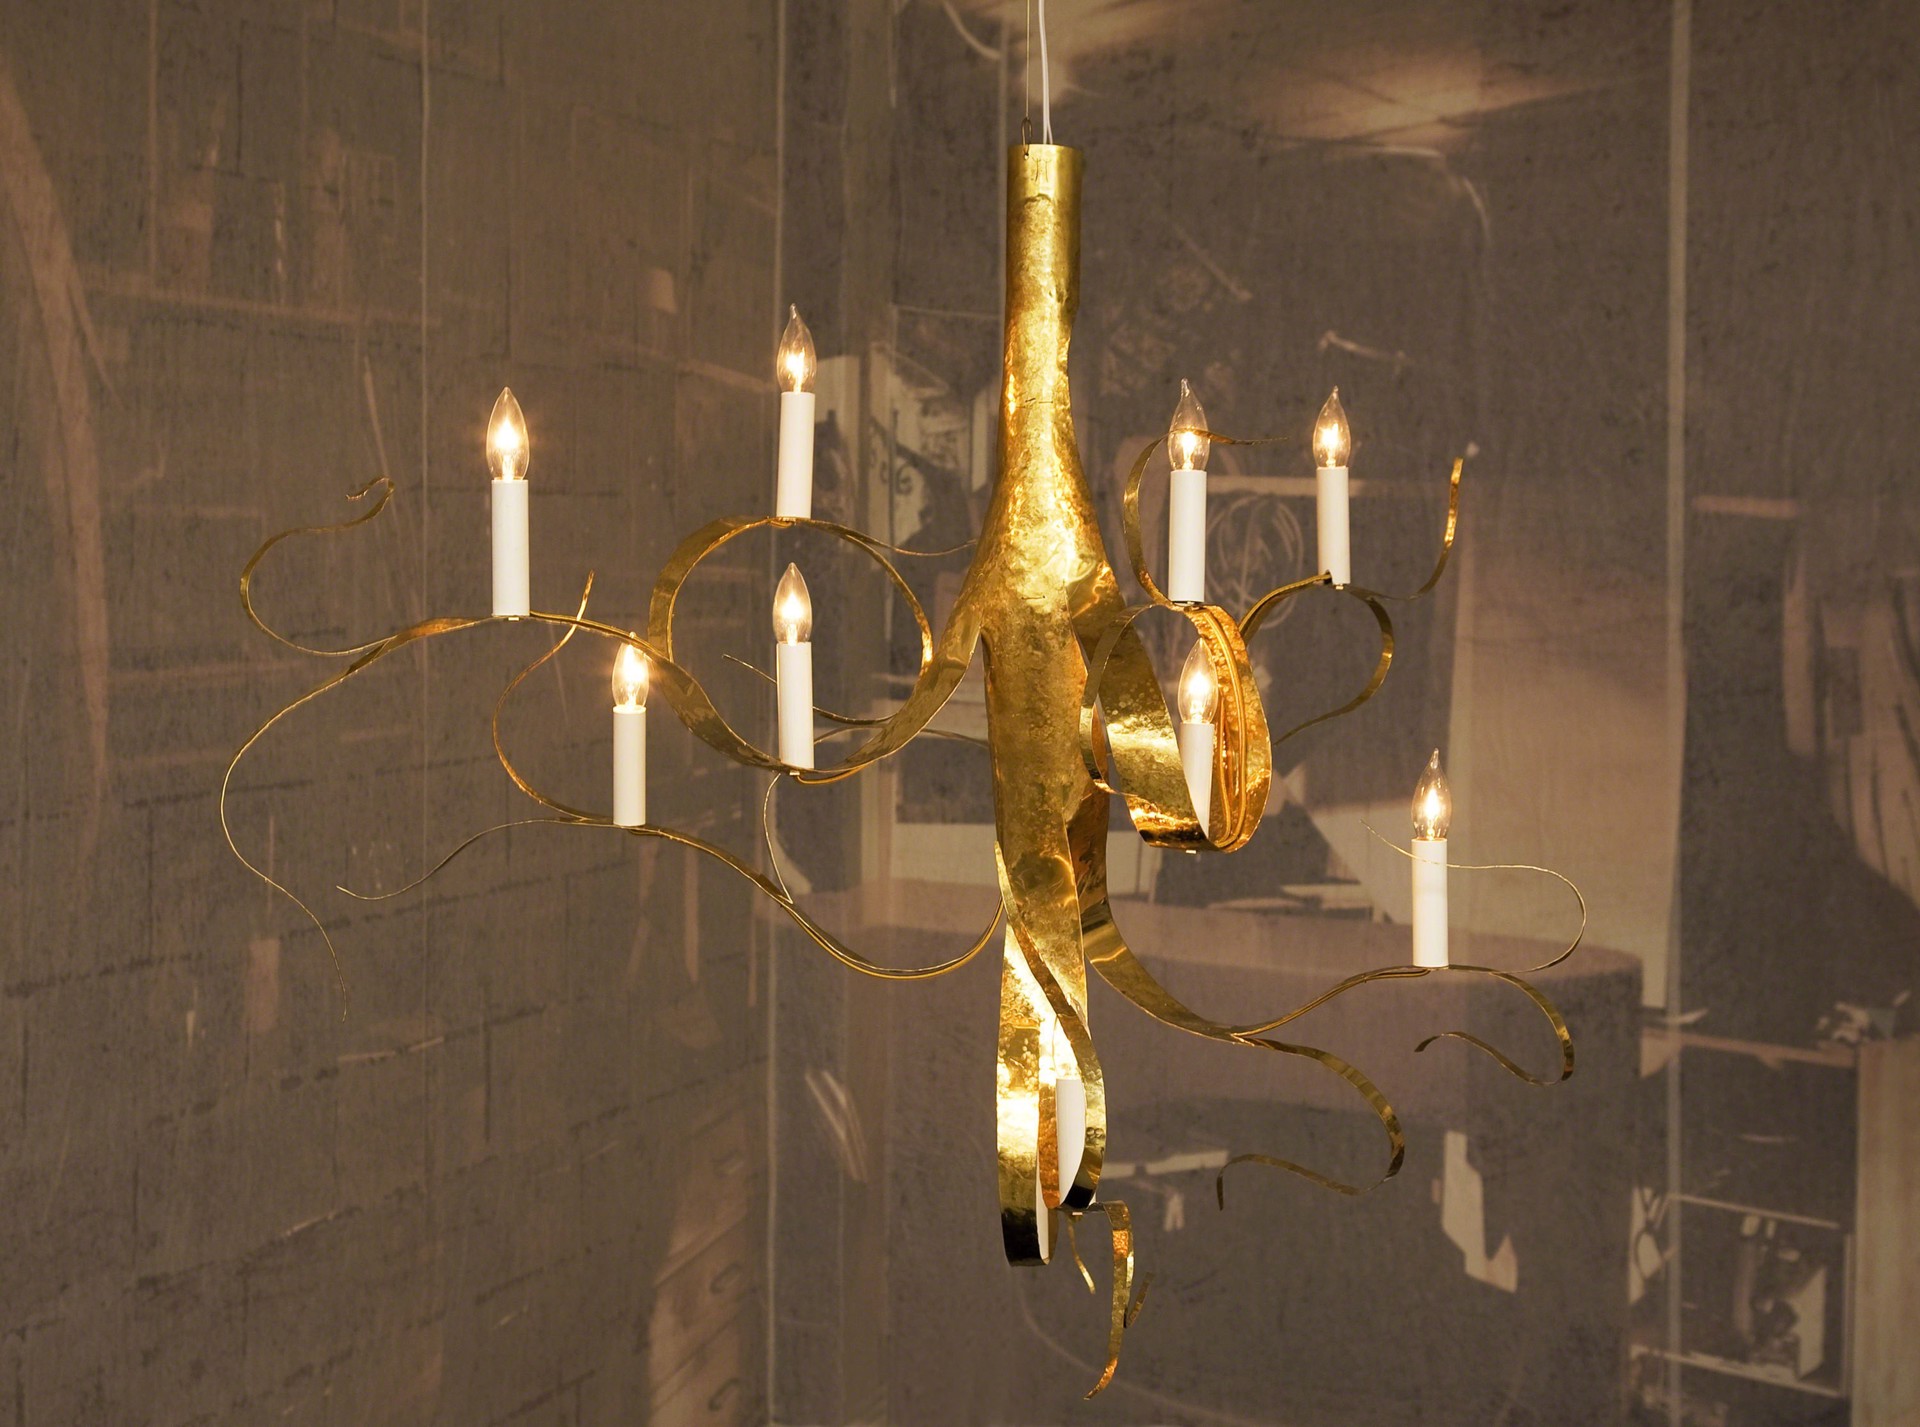 "Fiori" Chandelier by Jacques Jarrige